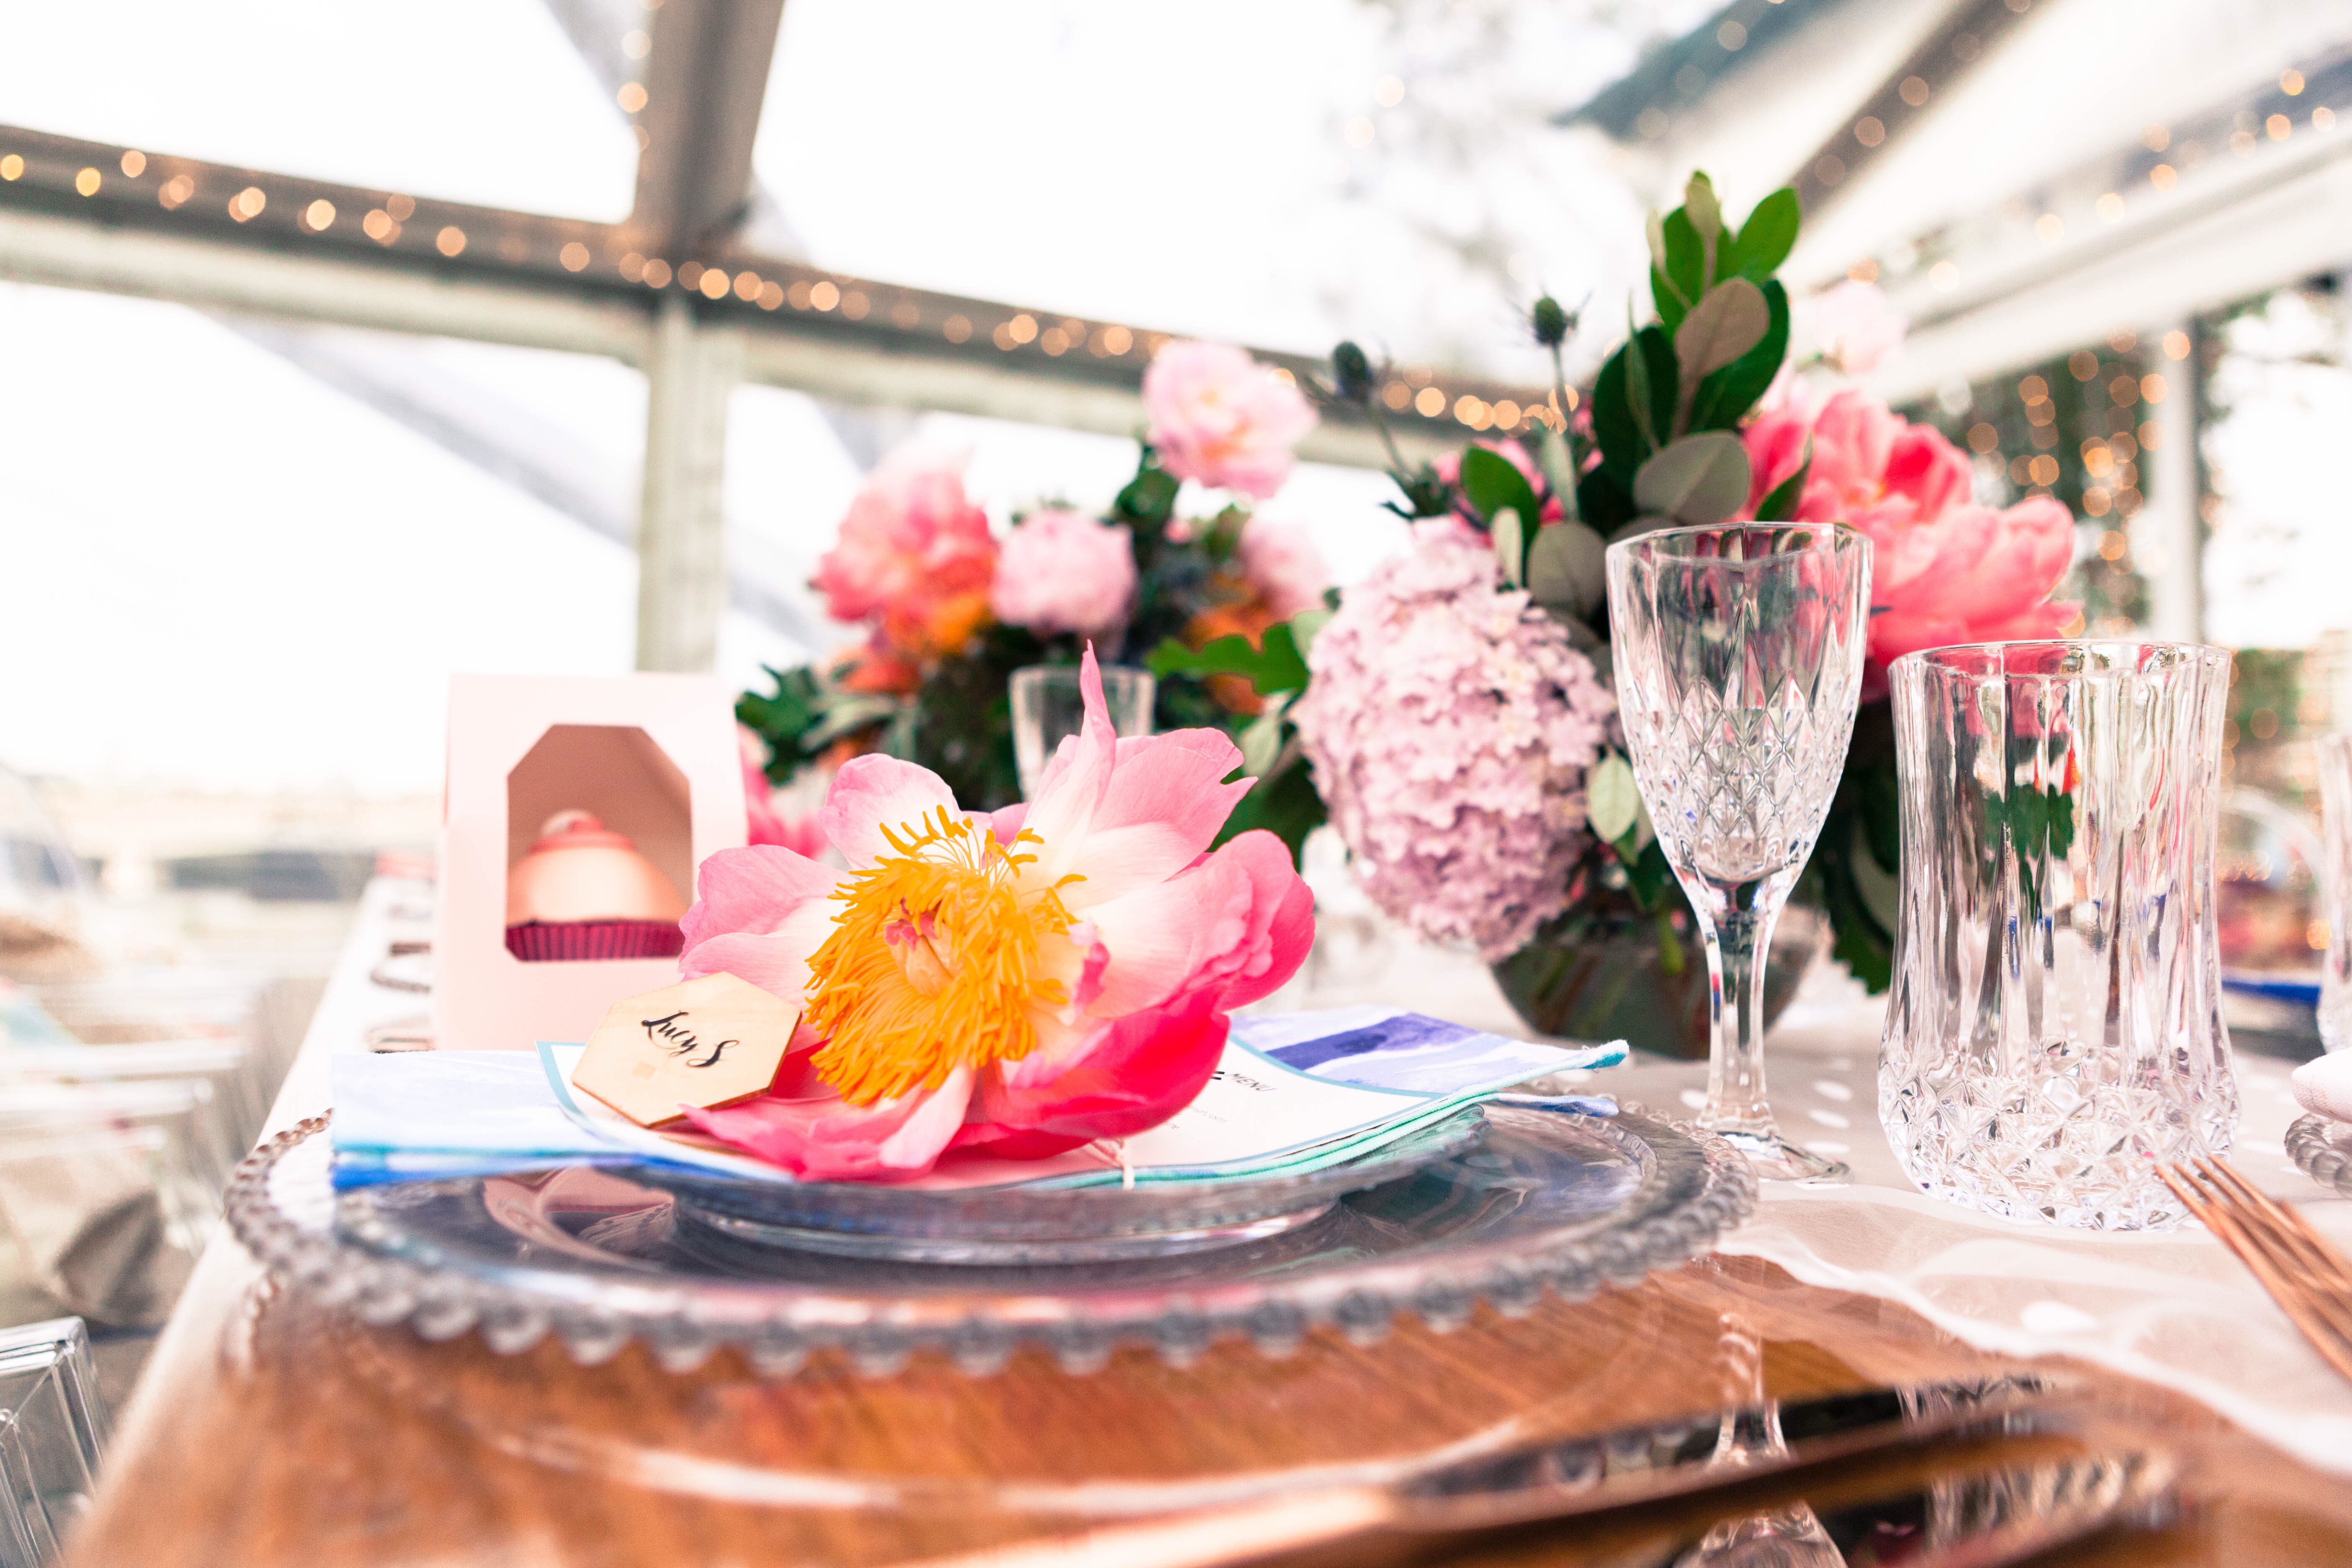 Florals adorning a table at a dinner party